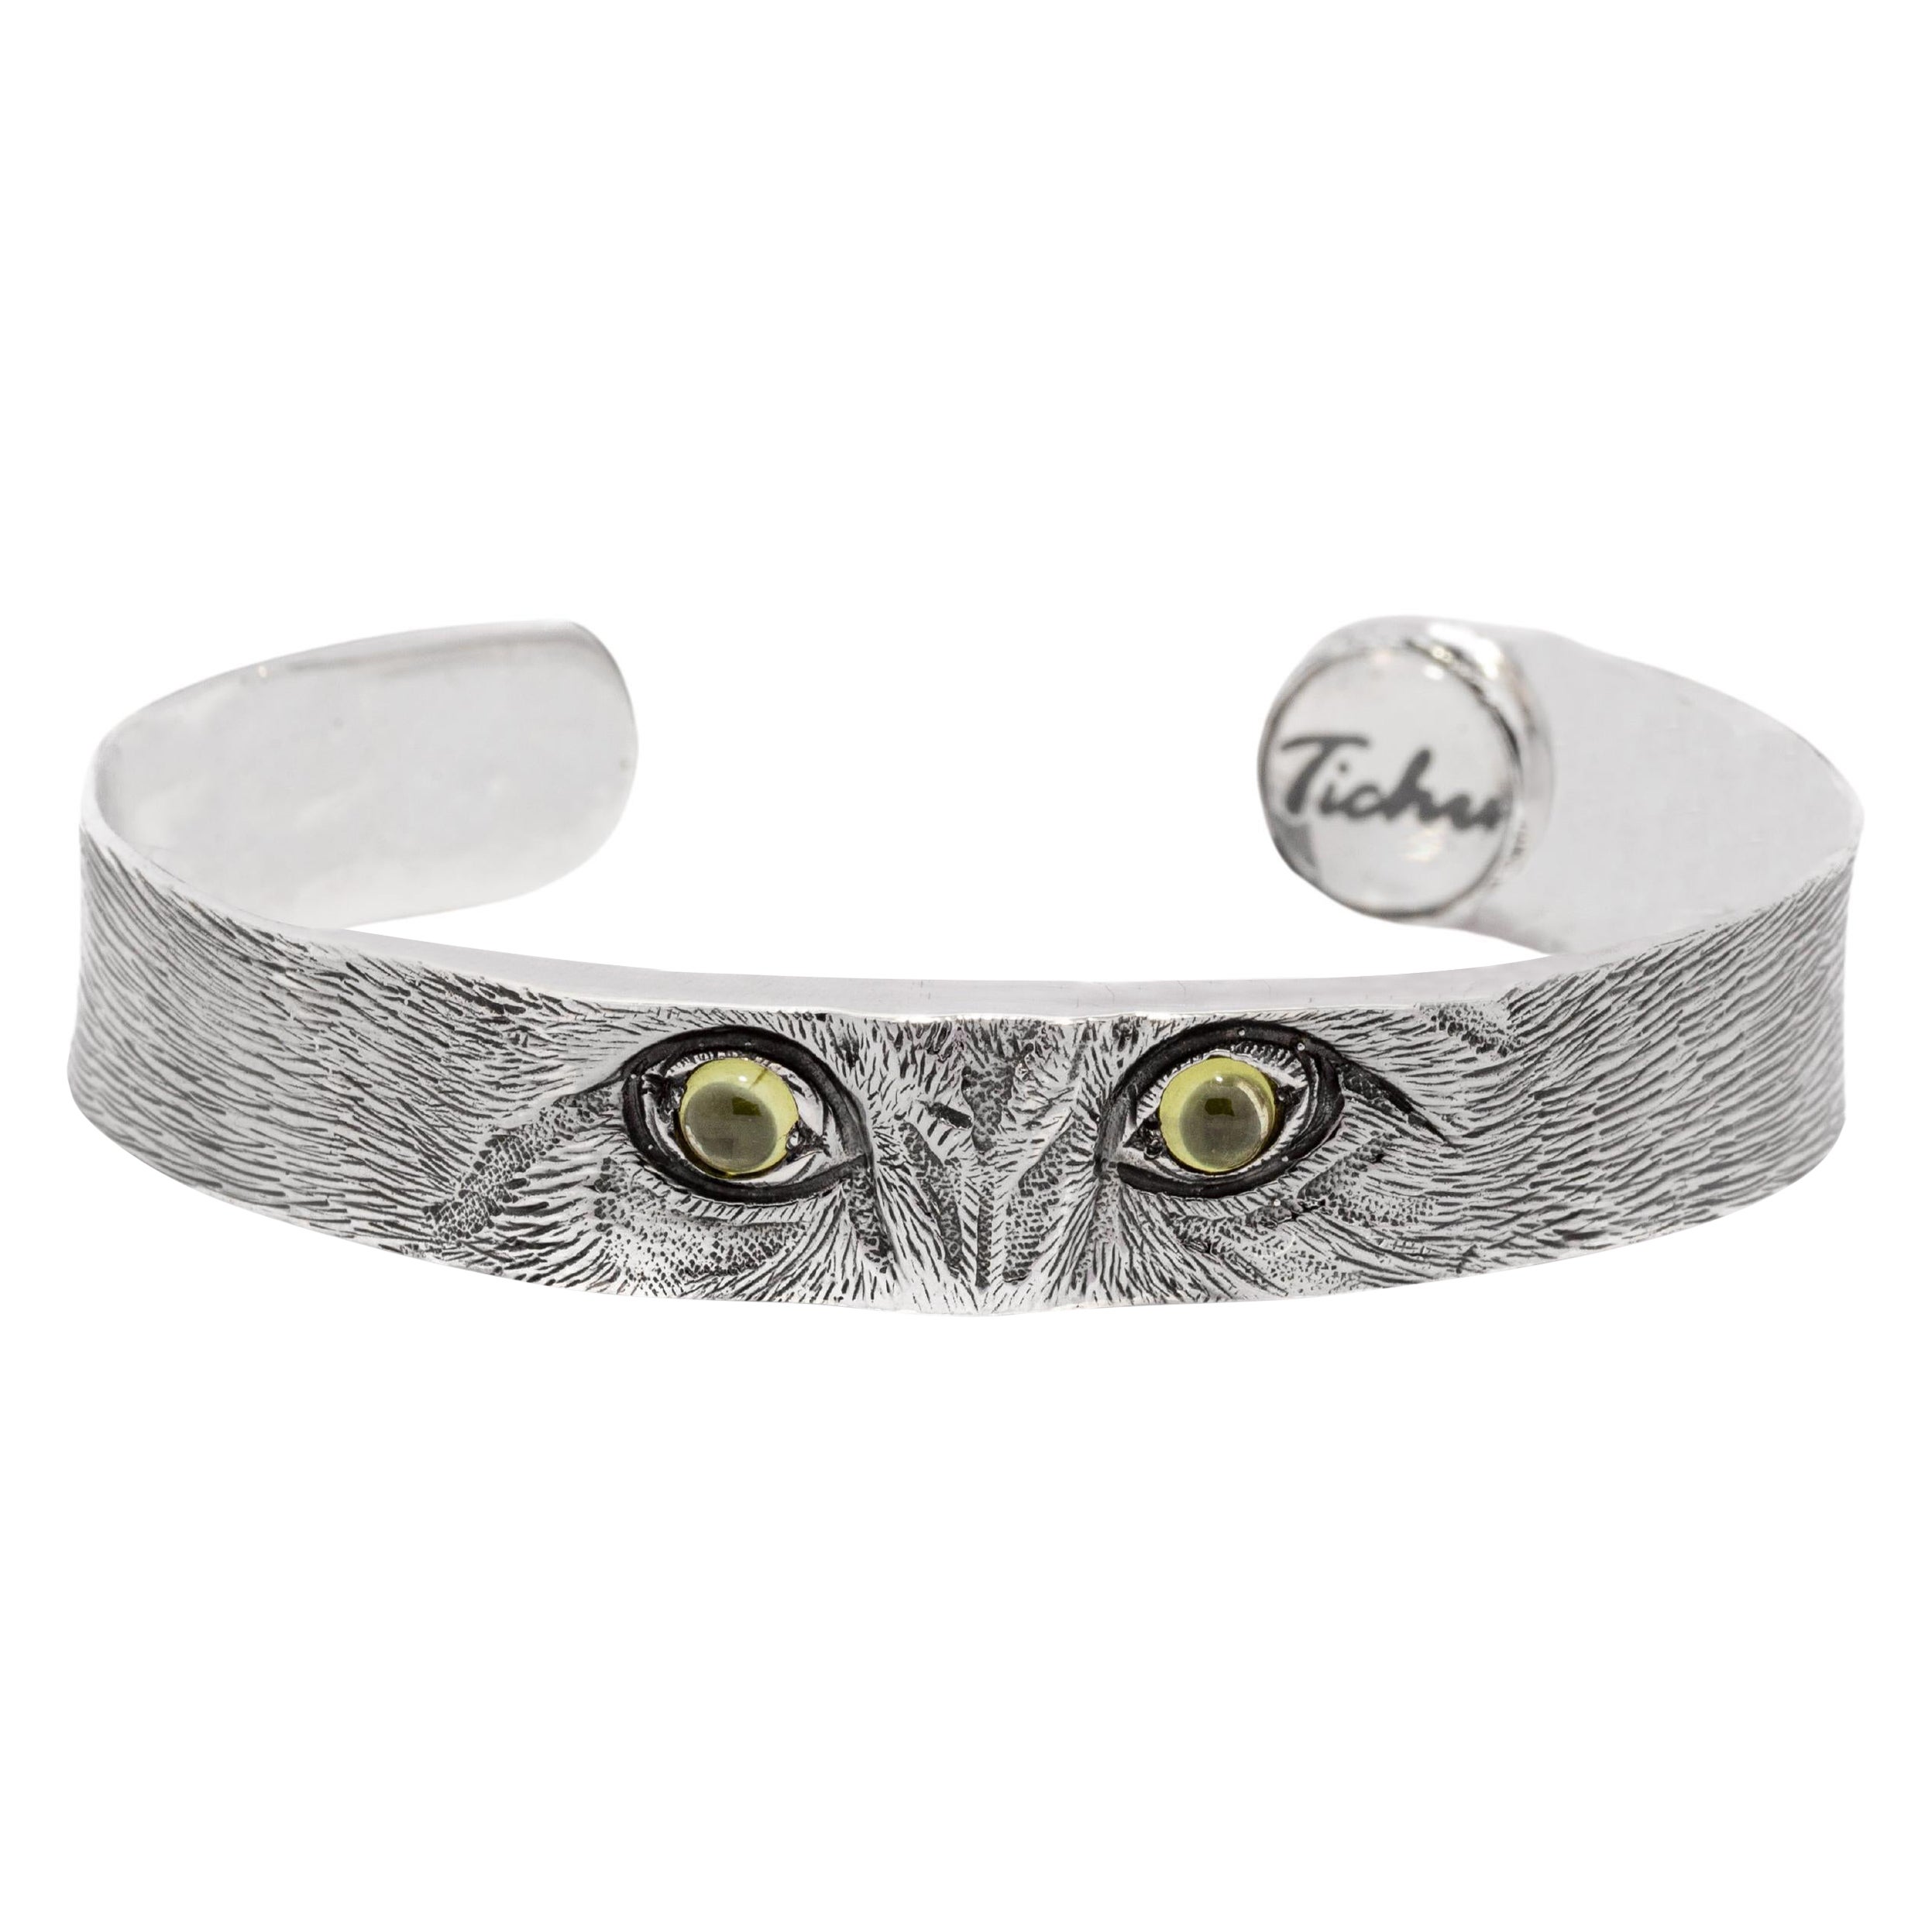 Tichu Peridot Cat Eyes Cuff in Sterling Silver and Crystal Quartz 'Size S' For Sale